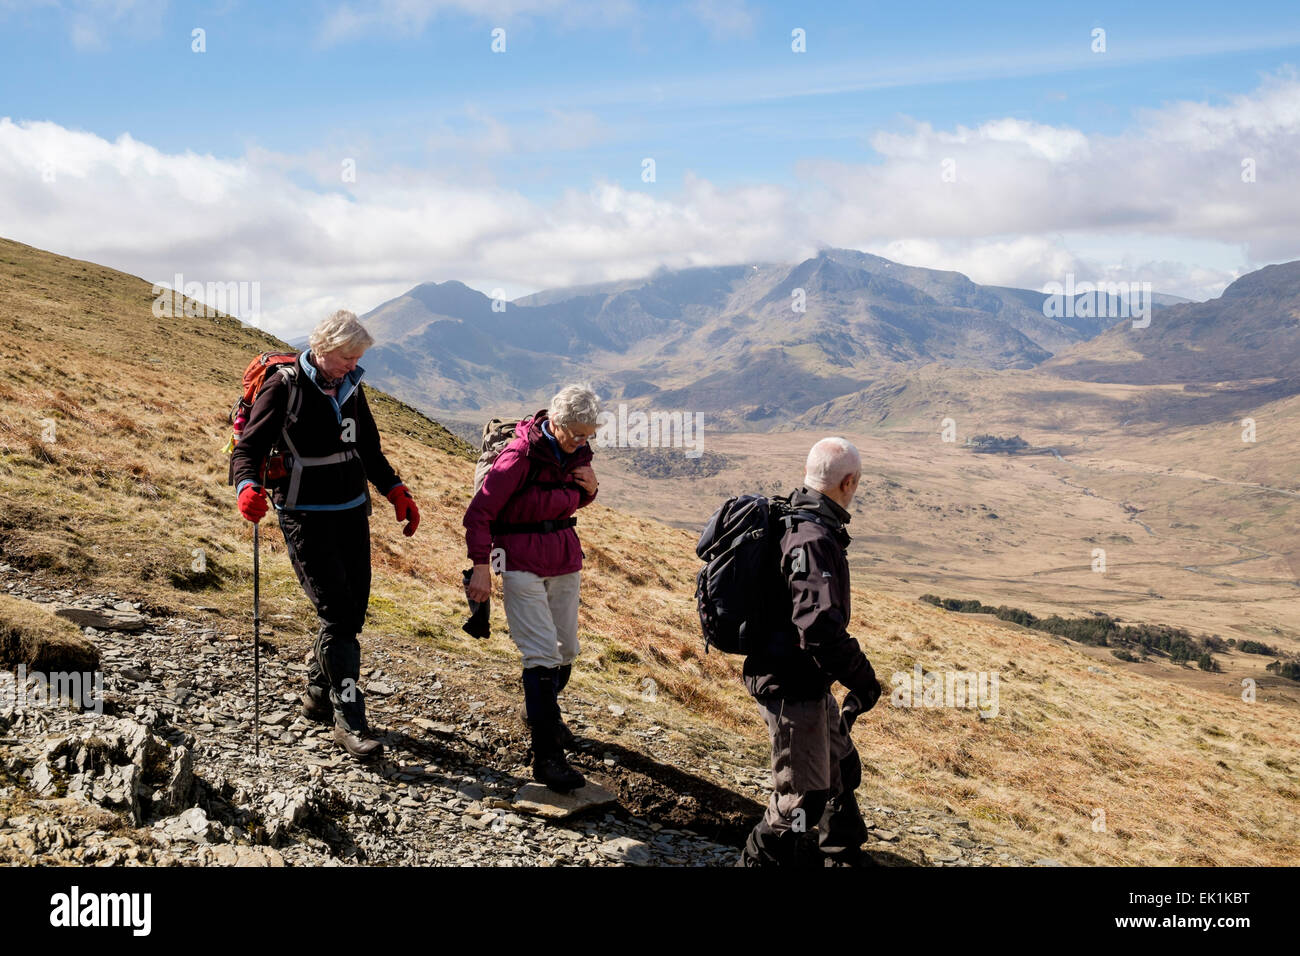 Wales, UK. Saturday 4th April 2015. Hikers enjoy glorious walking weather with clear views to Mount Snowdon Horseshoe in mountains of Snowdonia National Park. Capel Curig, Conwy, Wales, UK, Britain. Sunshine and blue skies are a welcome change from the recent weather conditions. Credit:  Realimage/Alamy Live News Stock Photo